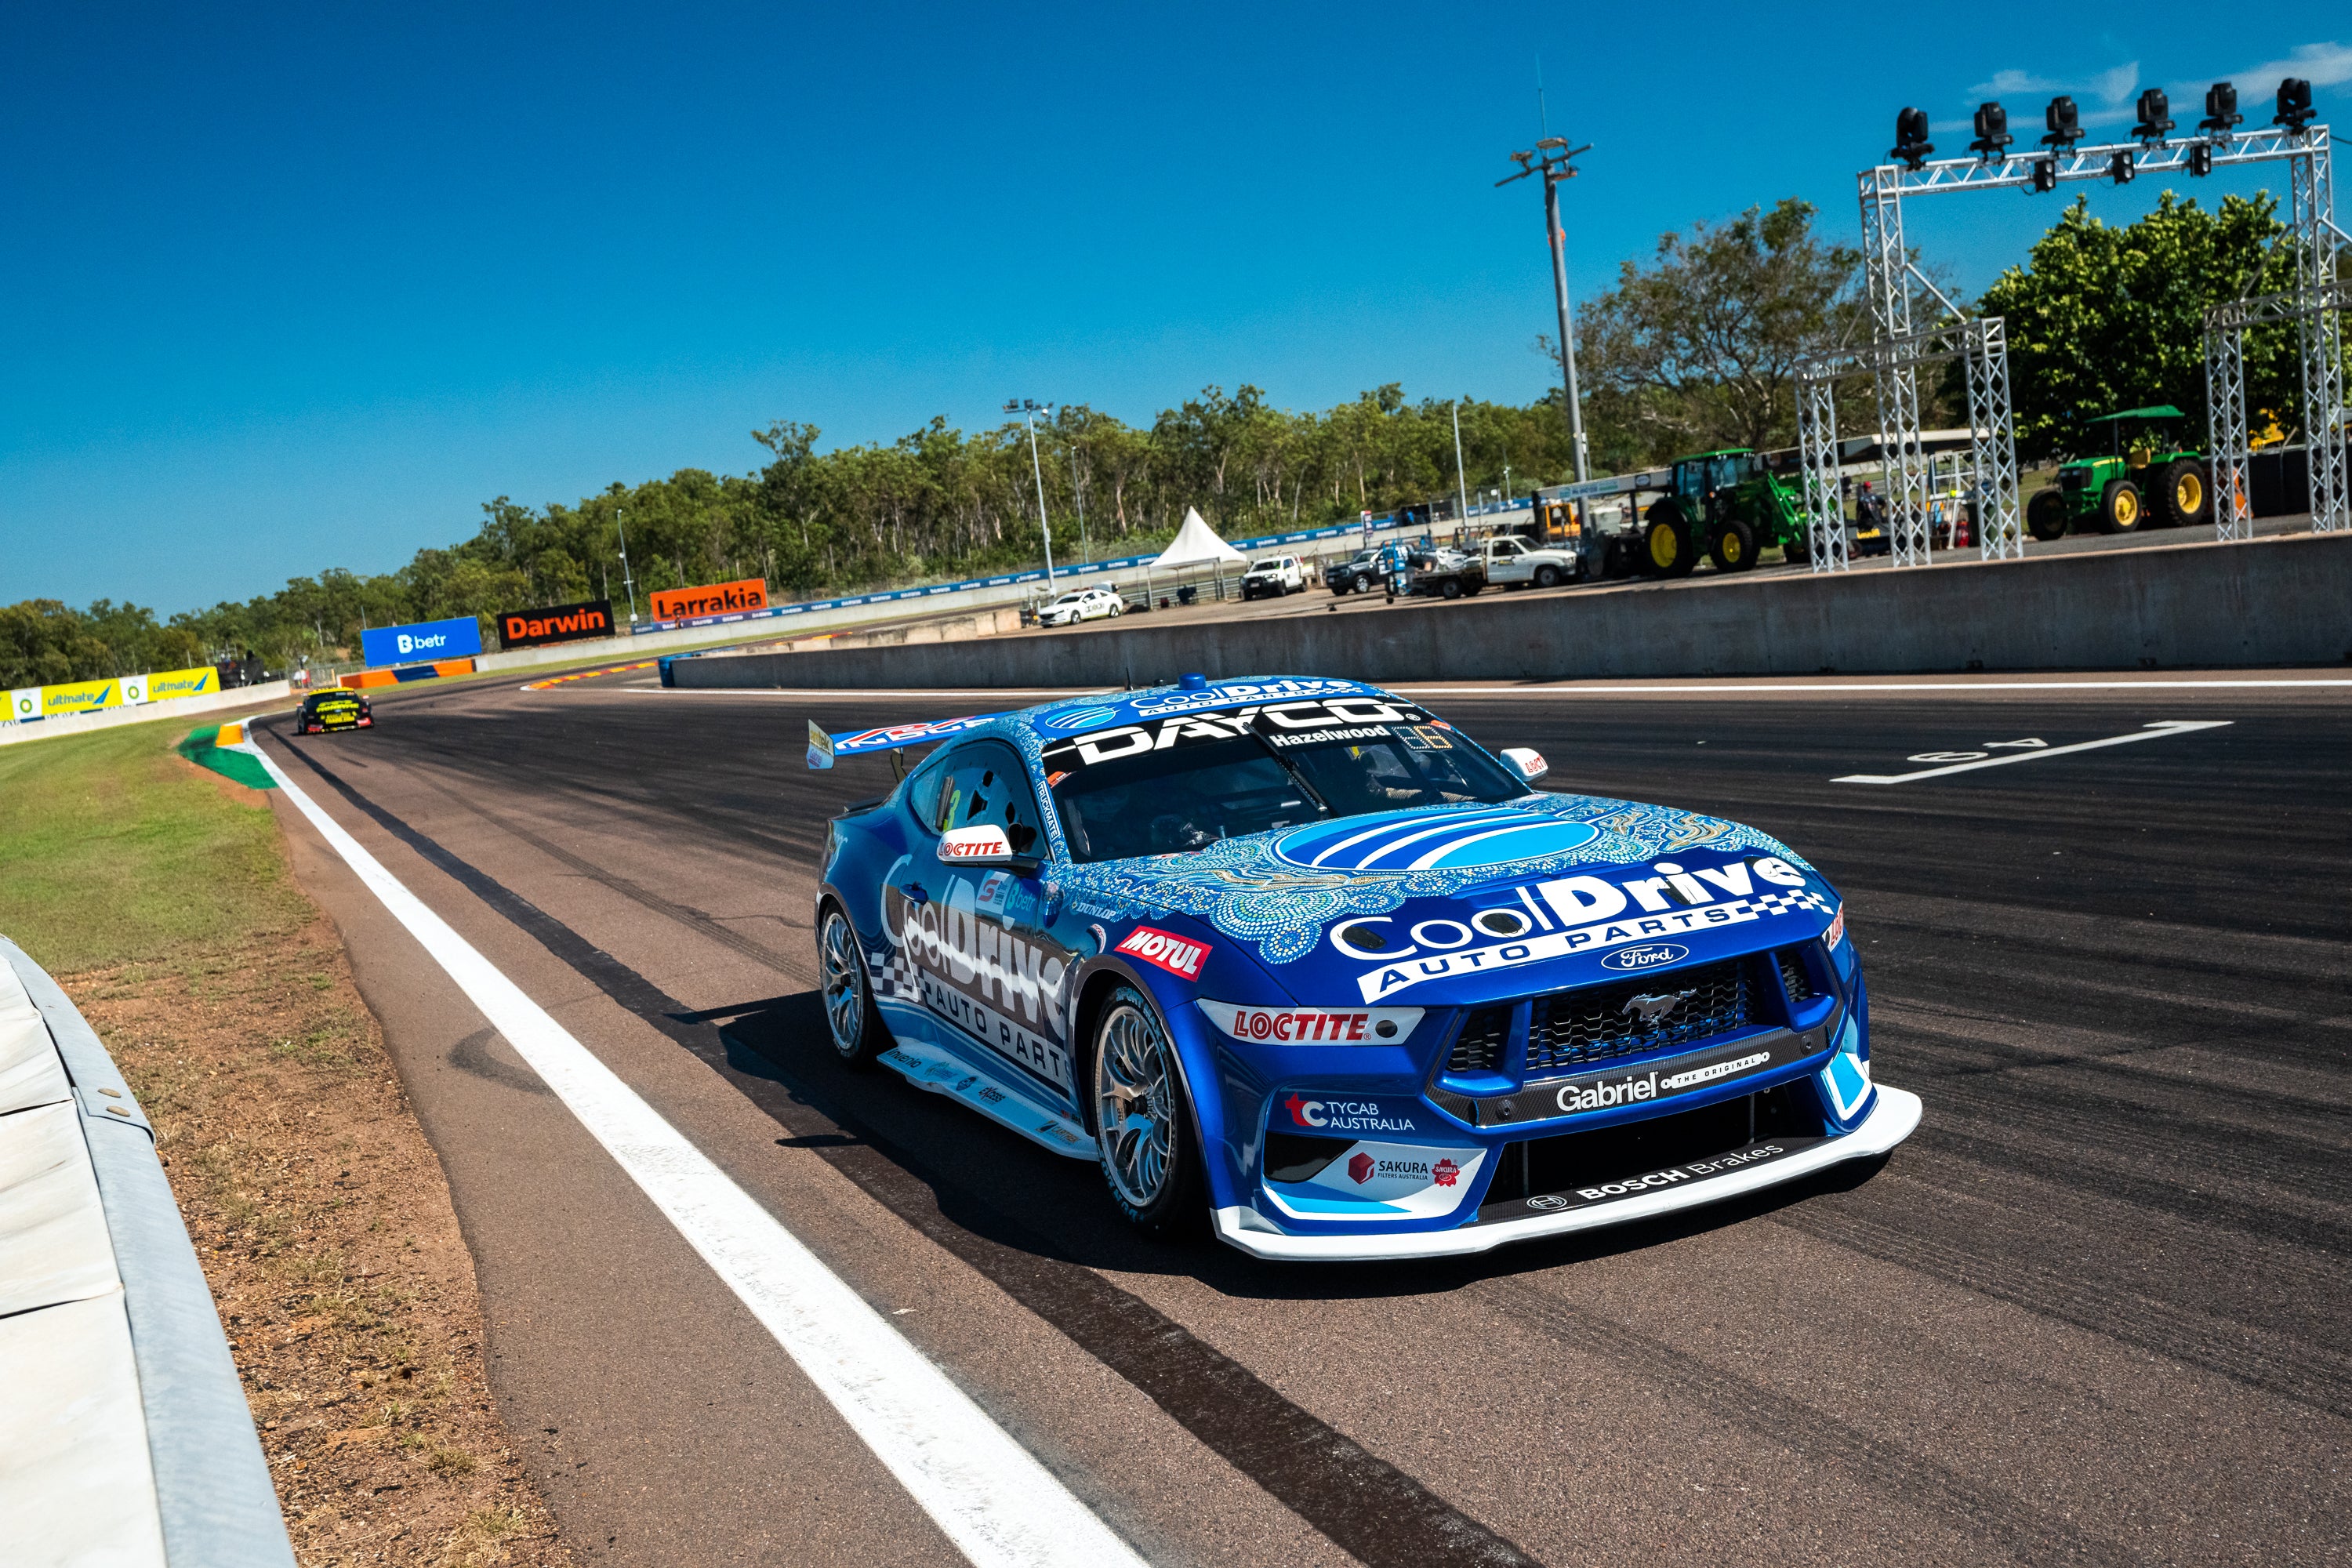 CoolDrive Racing Uncovers Striking Indigenous Round Livery